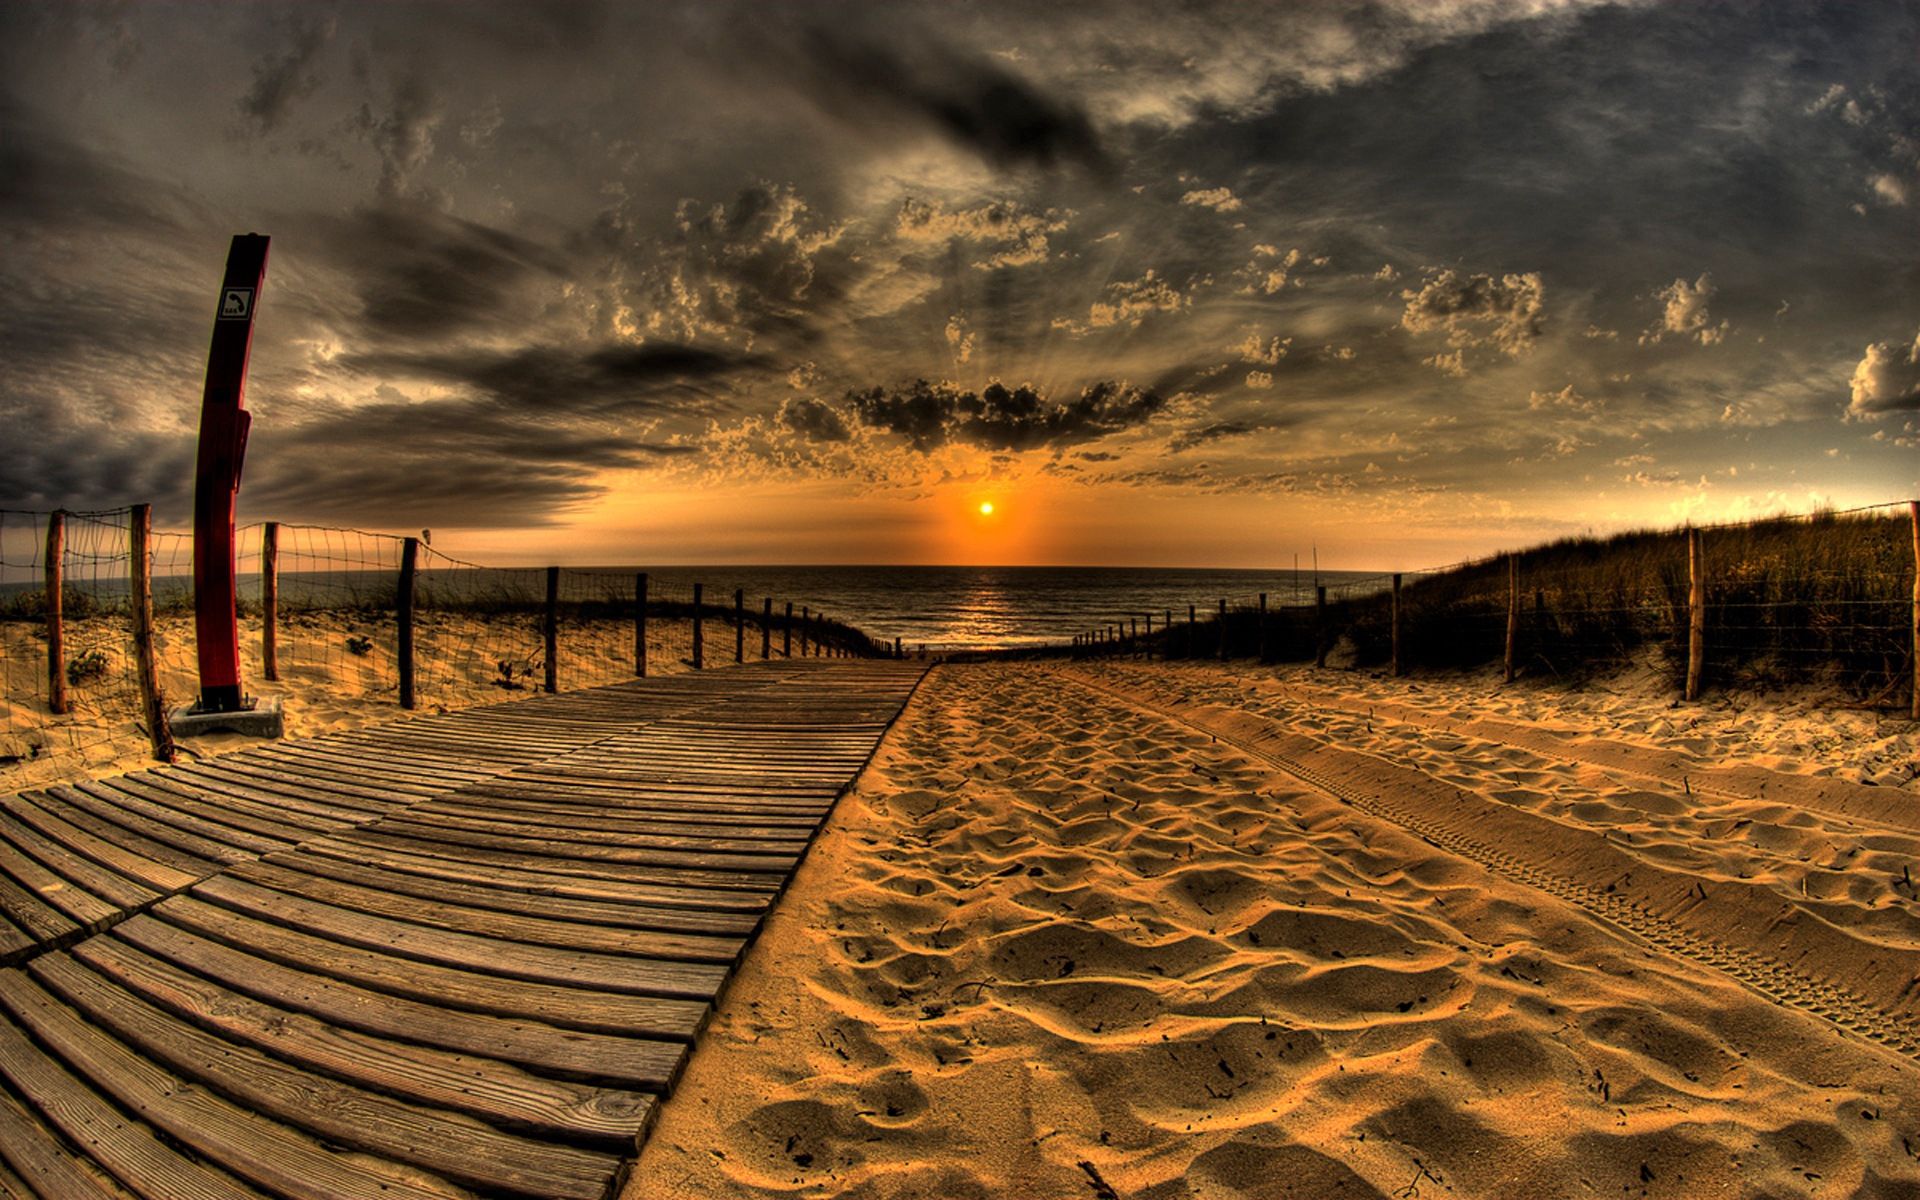 sunset, beach, road, evening, sun, sky, nature, clouds, sand, fence, traces images